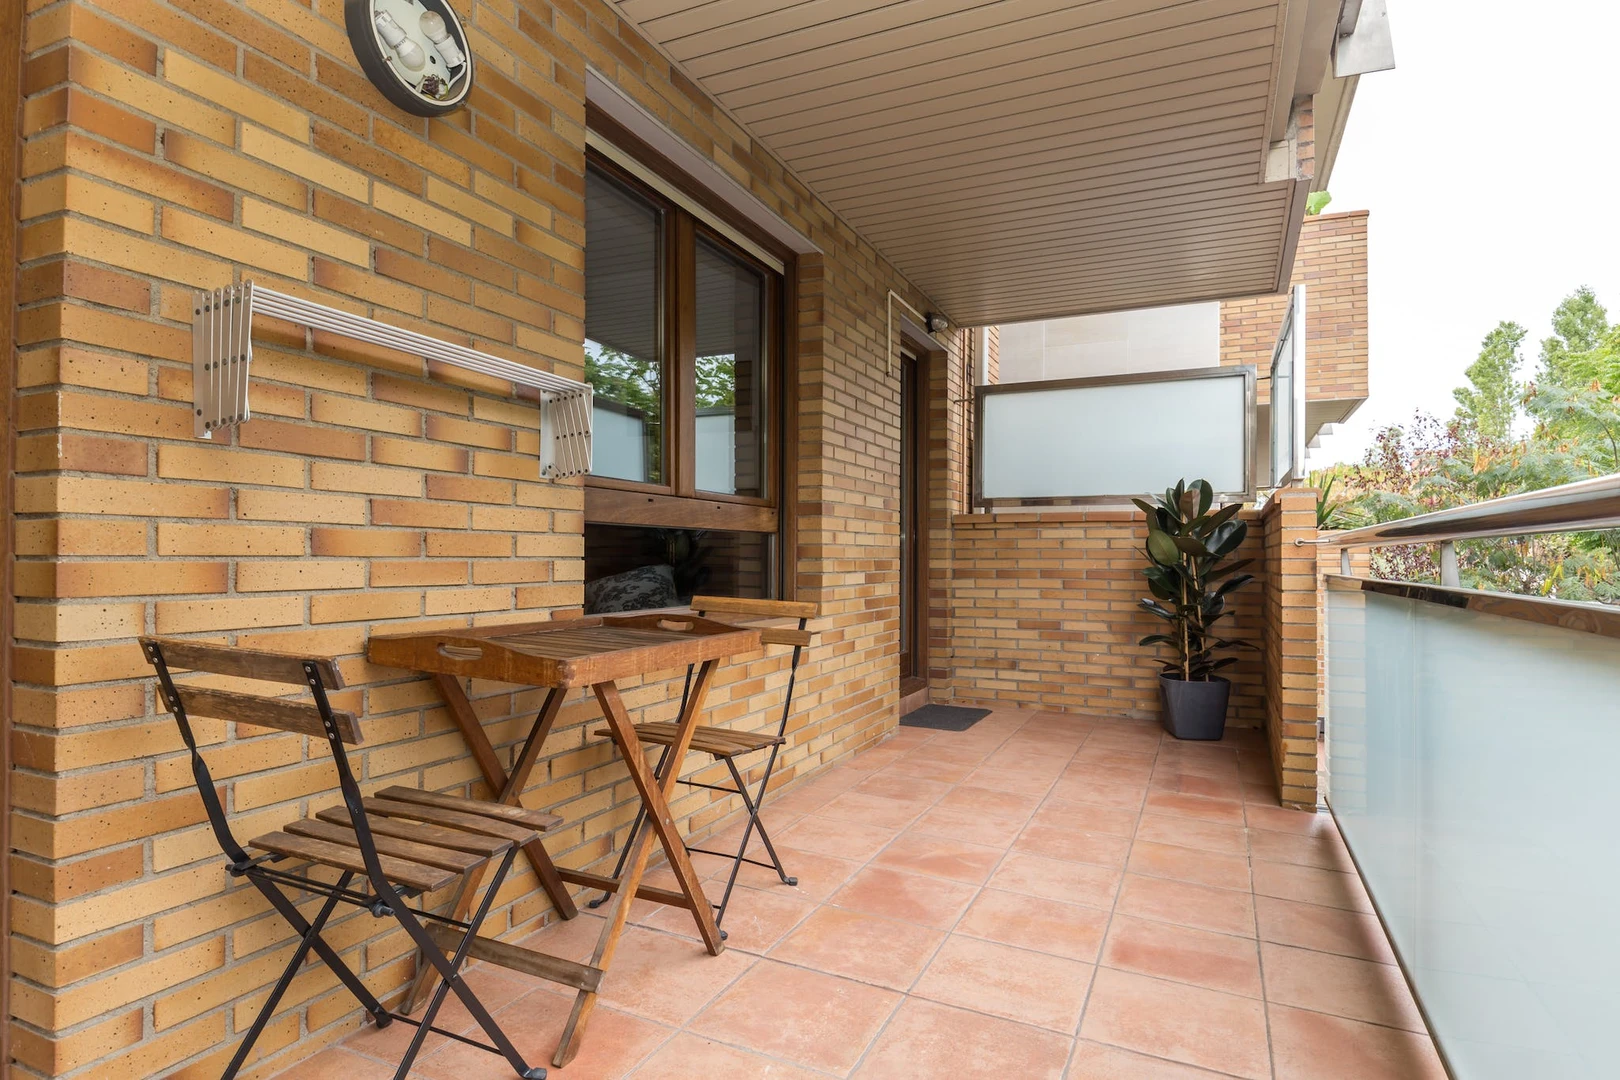 Accommodation with 3 bedrooms in Sant Cugat Del Vallès